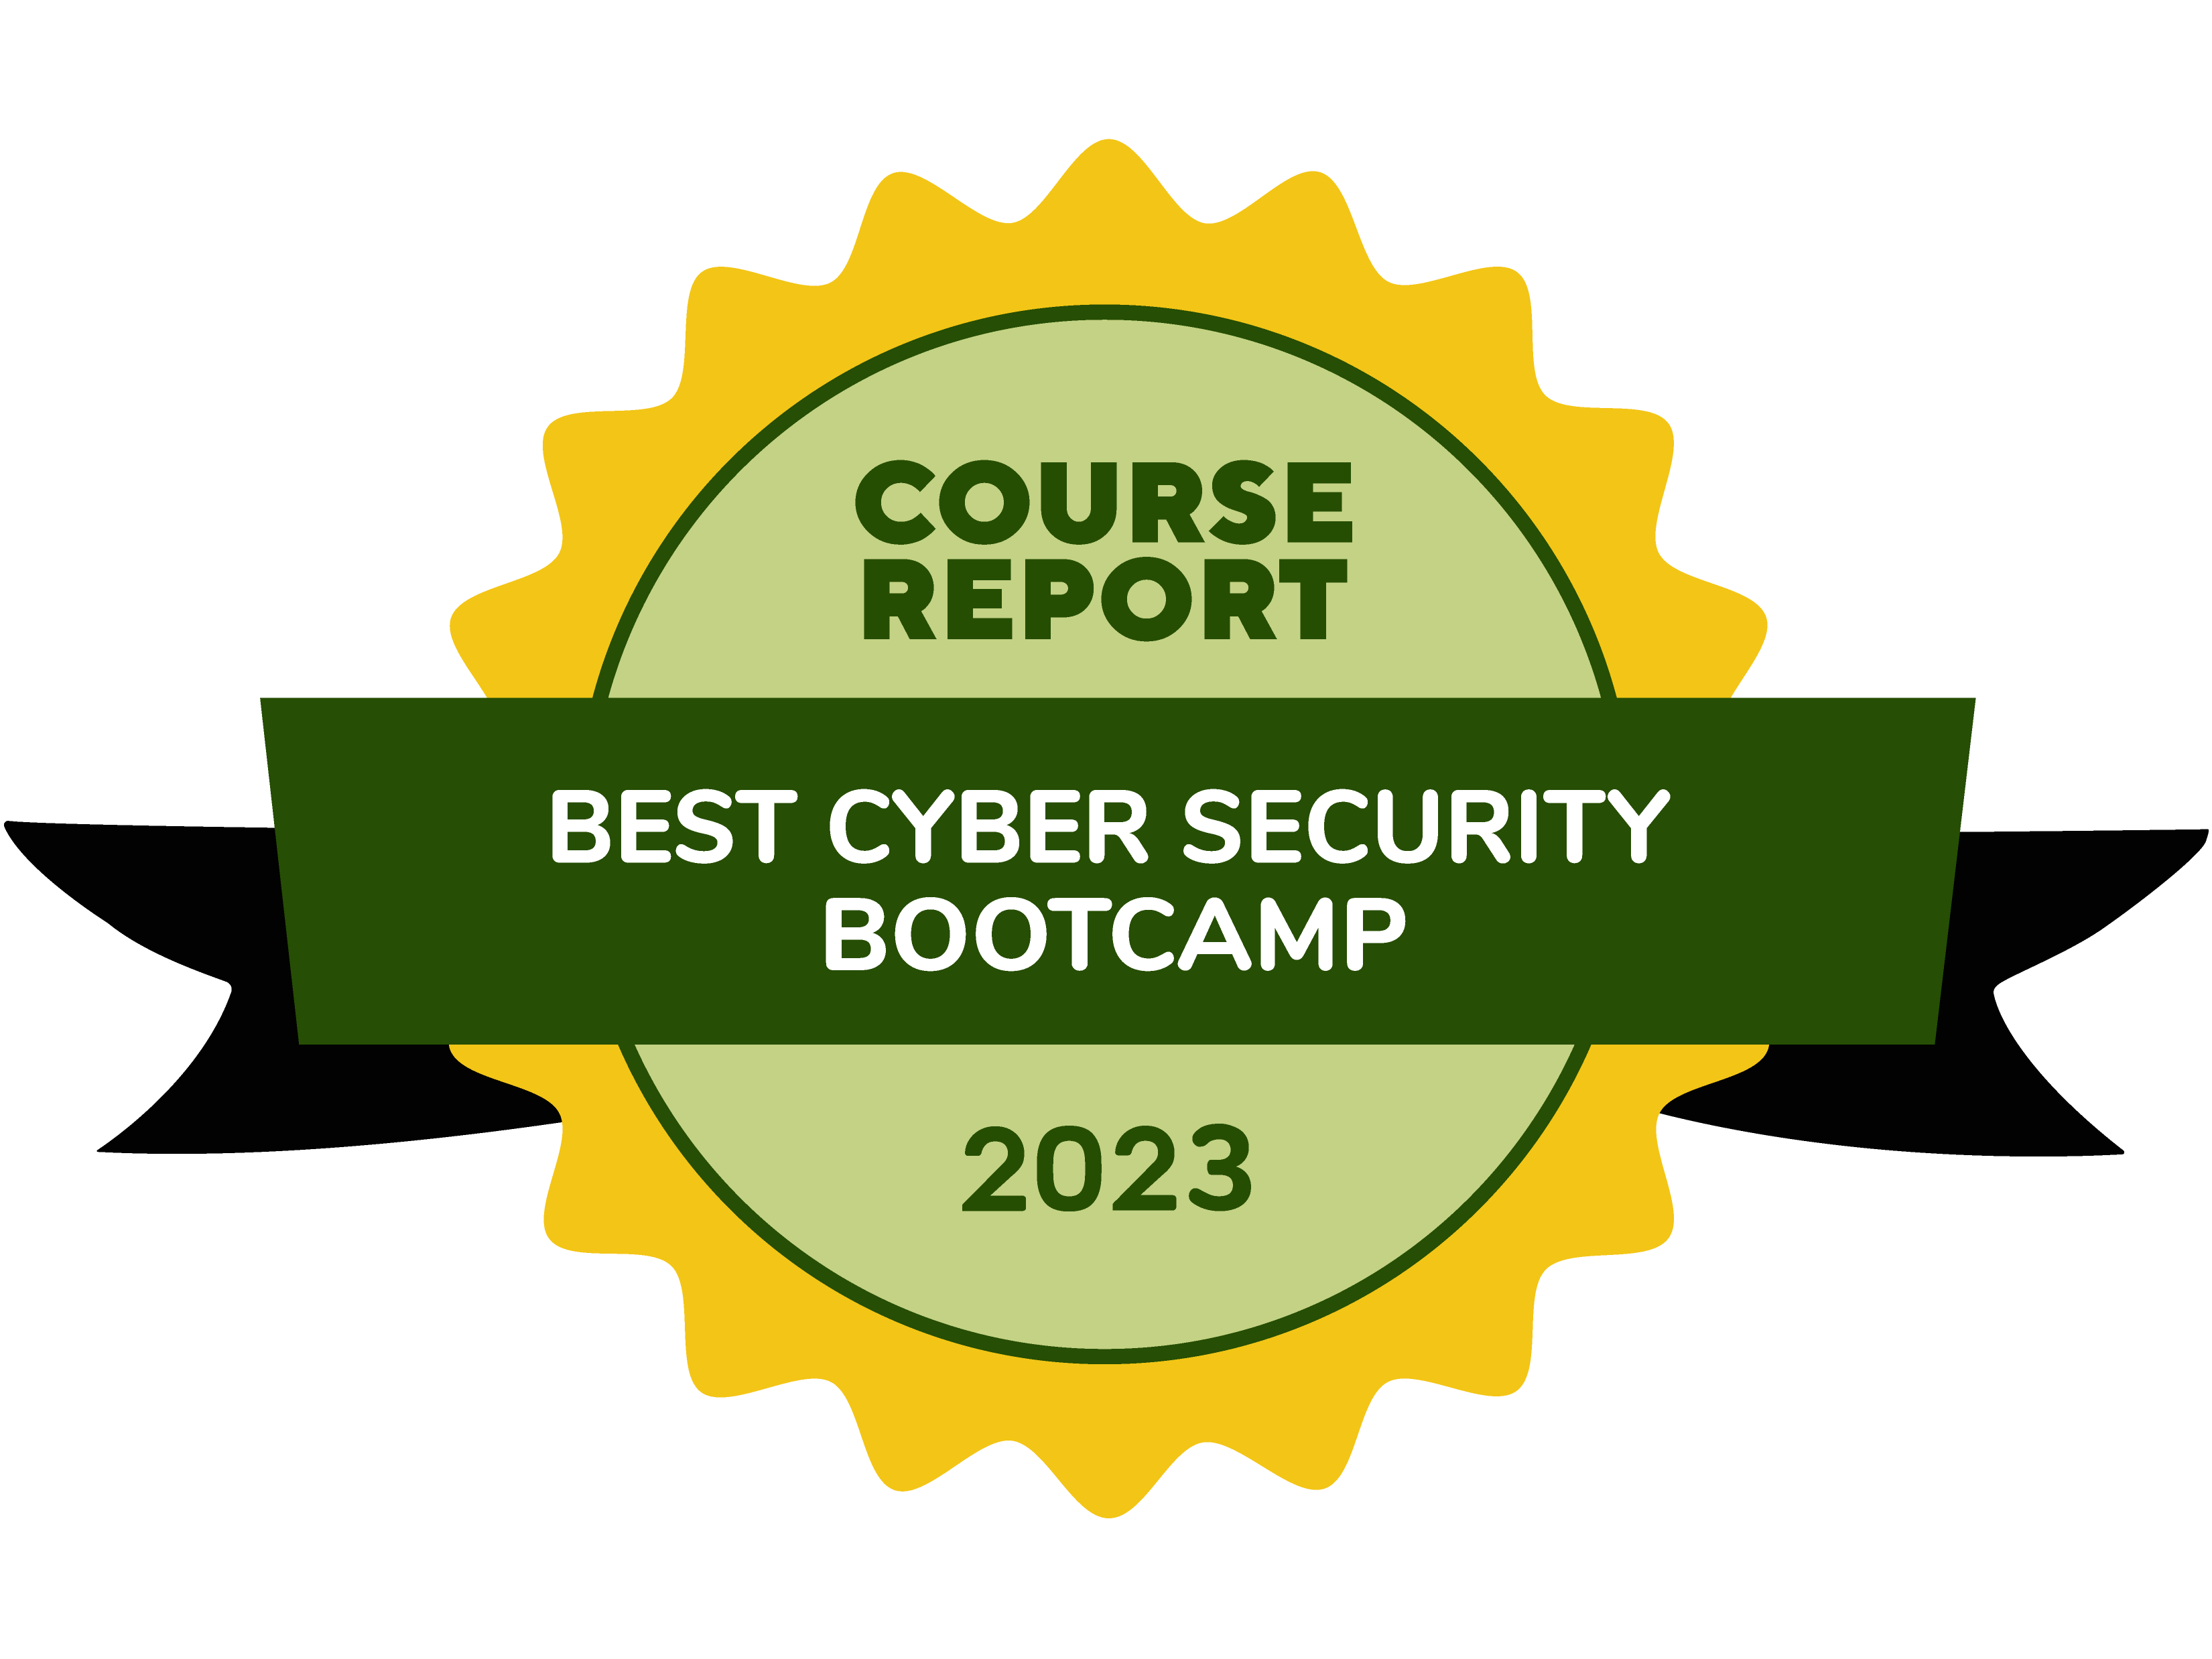 Best Cybersecurity bootcamp award 2023